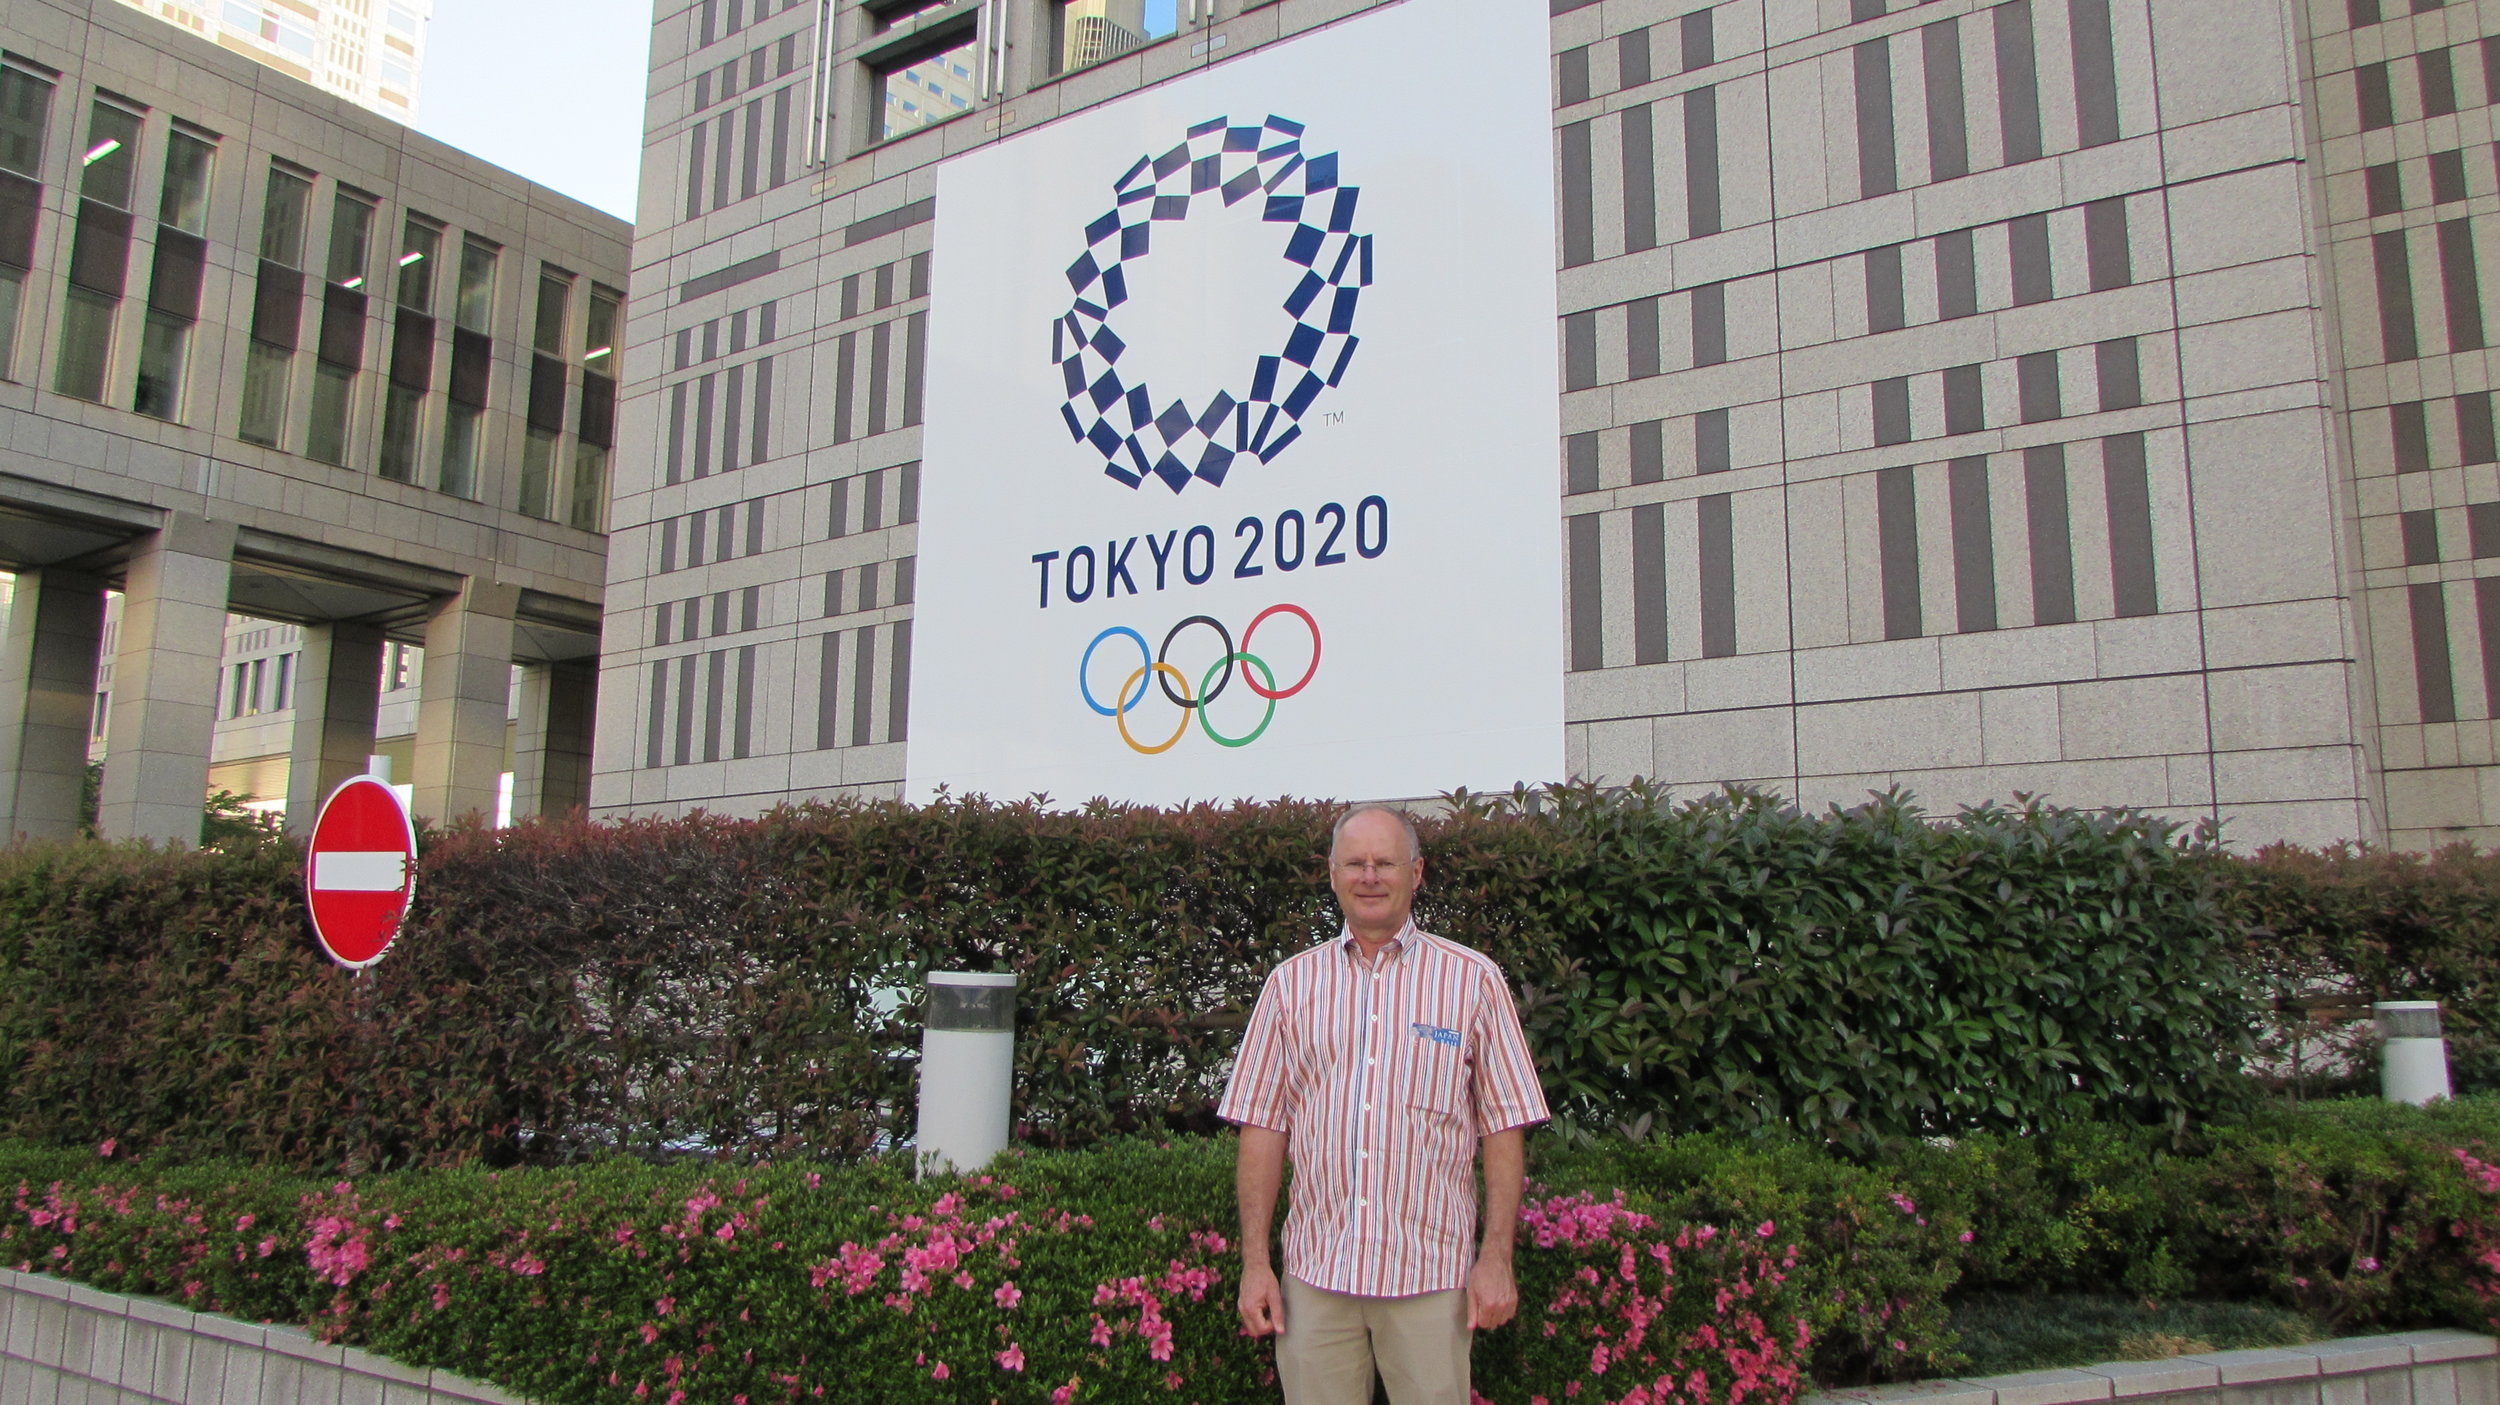 In front of the City Hall in Tokyo